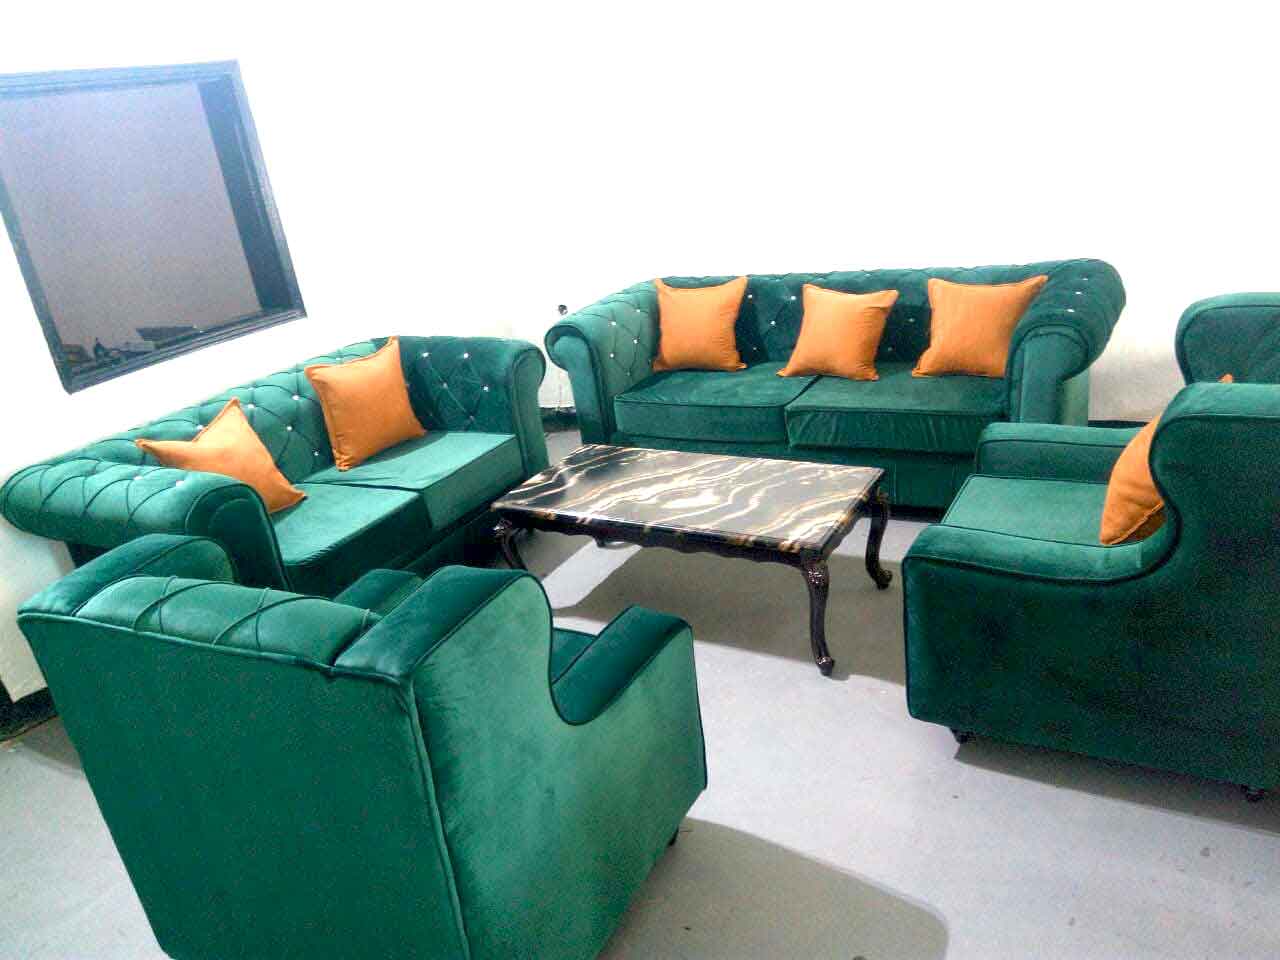 Green-Velvet-Colored-Sofa-with-Yellow-Pillows